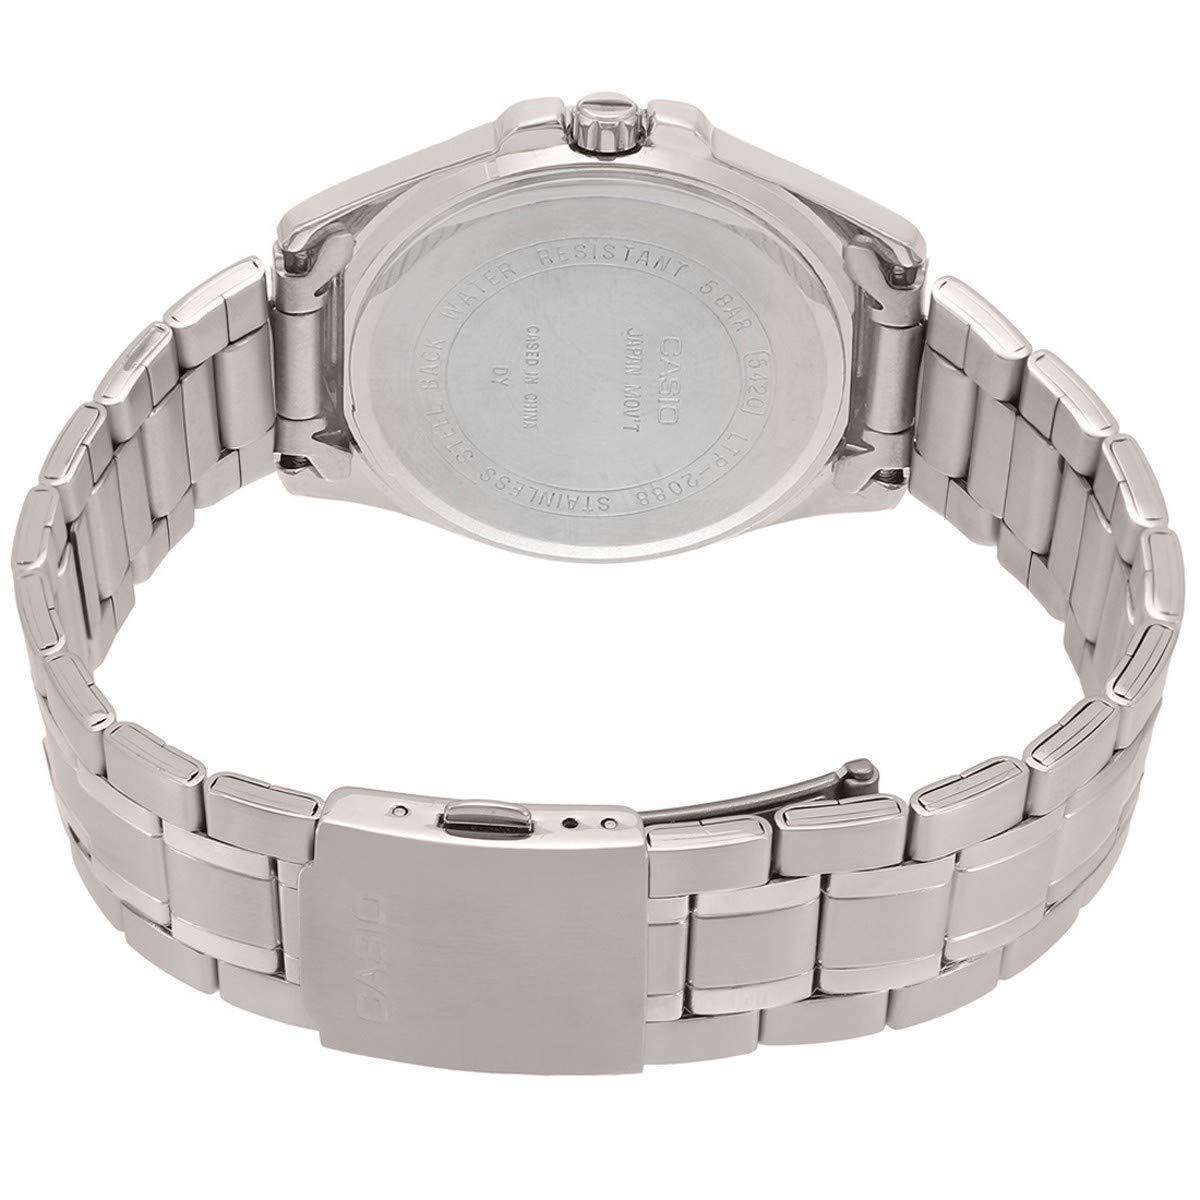 Casio LTP-2088D-1A2 Silver Stainless Watch for Women-Watch Portal Philippines